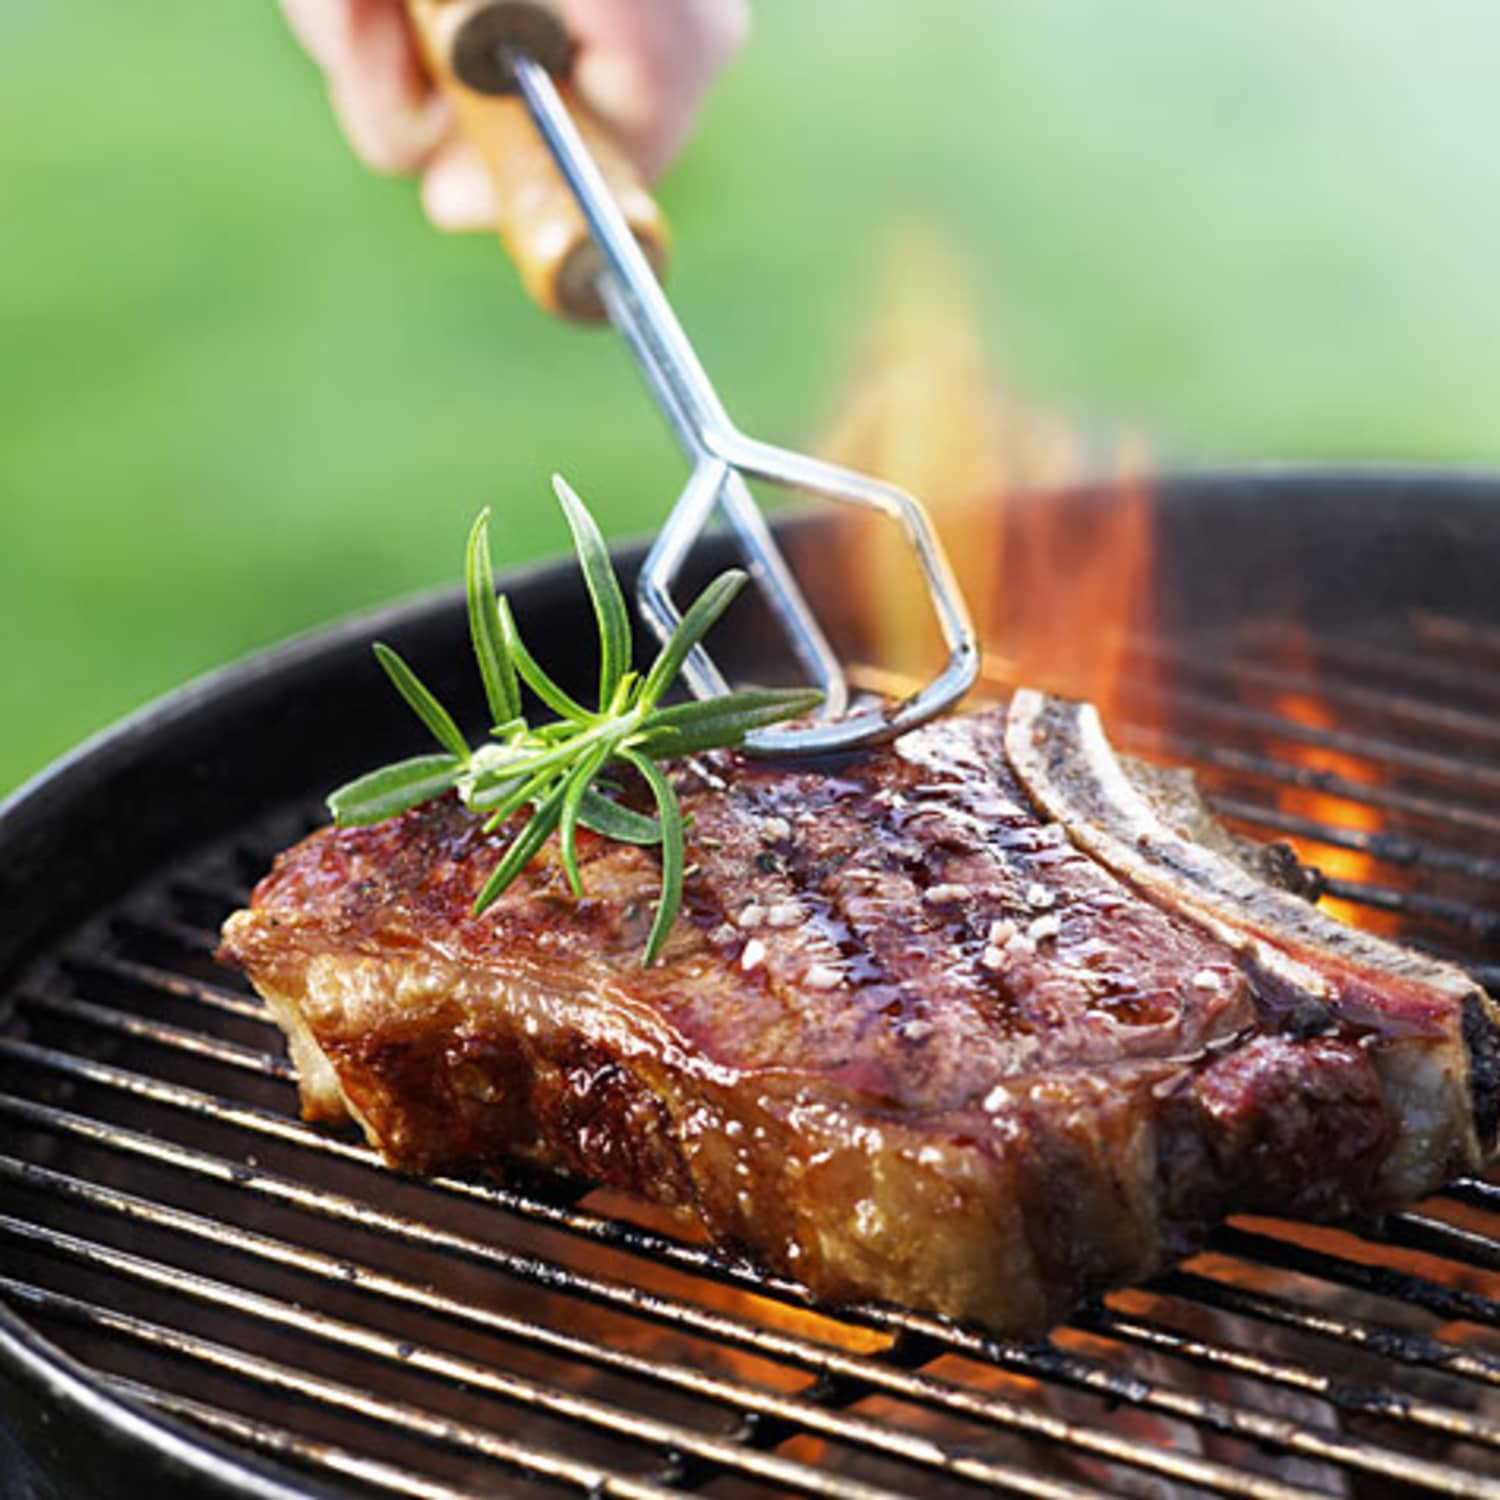 How To Grill Steak On Gas Grill Temperature